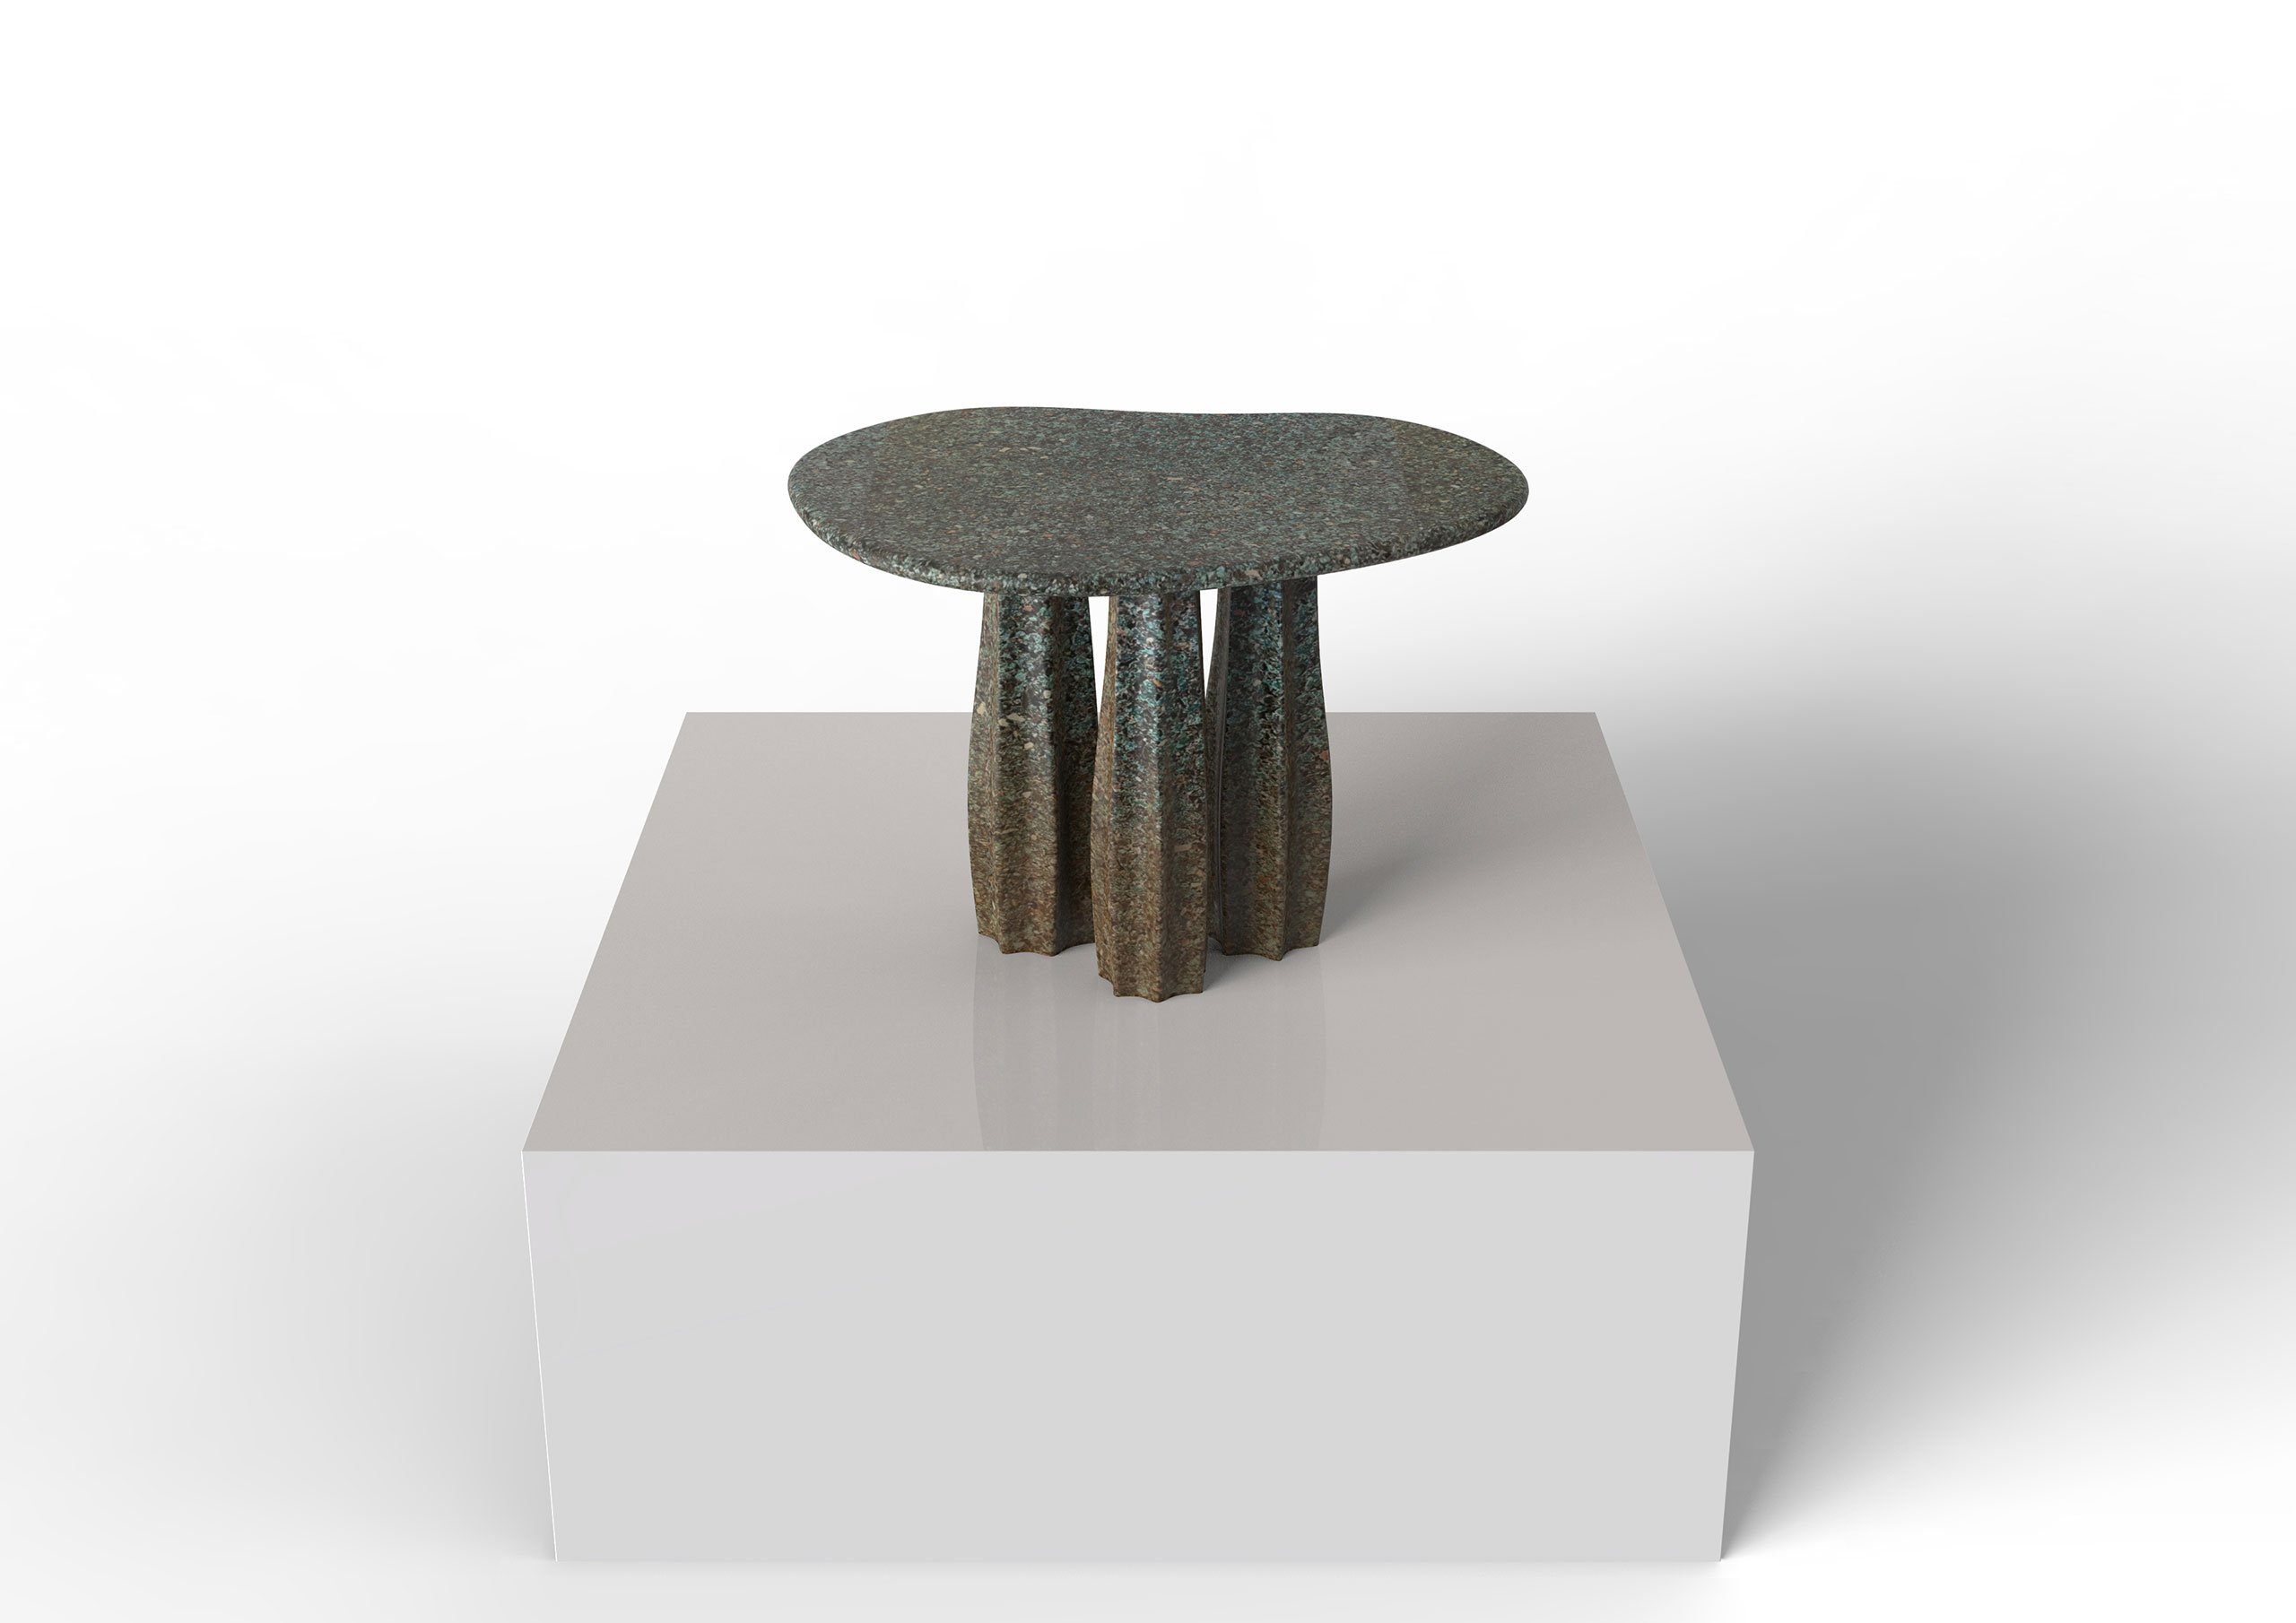 Cactus Low Table by Georges Mohasseb for Studio Manda, 2021.
20/21 SELECTION. Palazzo Valli Bruni.